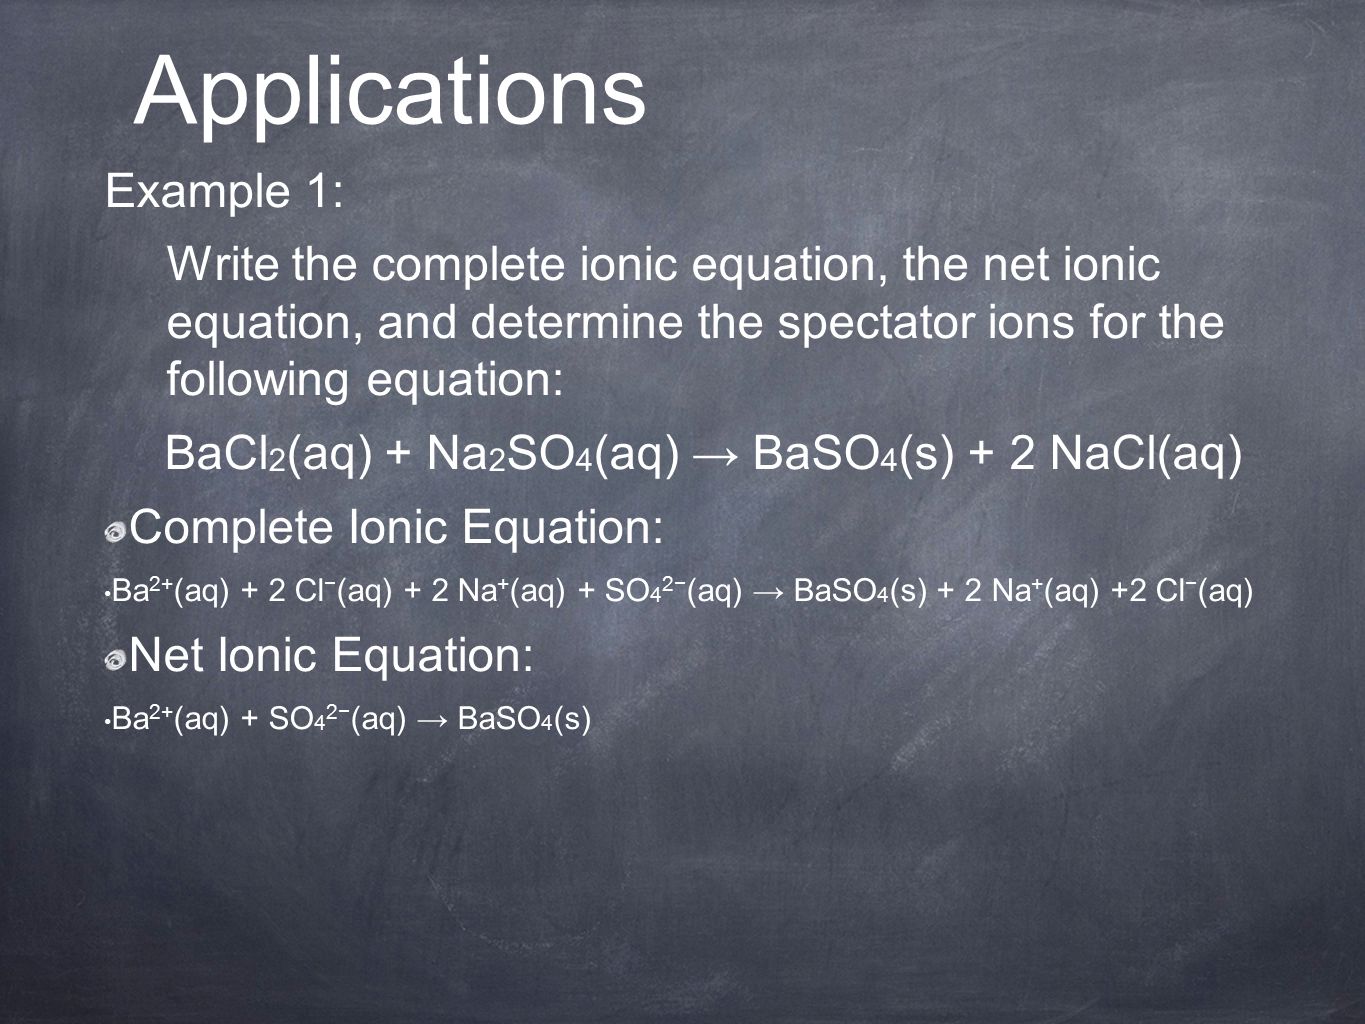 Example 1: Write the complete ionic equation, the net ionic equation, and determine the spectator ions for the following equation: BaCl 2 (aq) + Na 2 SO 4 (aq) → BaSO 4 (s) + 2 NaCl(aq) Complete Ionic Equation: Ba 2+ (aq) + 2 Cl − (aq) + 2 Na + (aq) + SO 4 2− (aq) → BaSO 4 (s) + 2 Na + (aq) +2 Cl − (aq) Net Ionic Equation: Ba 2+ (aq) + SO 4 2− (aq) → BaSO 4 (s) Applications